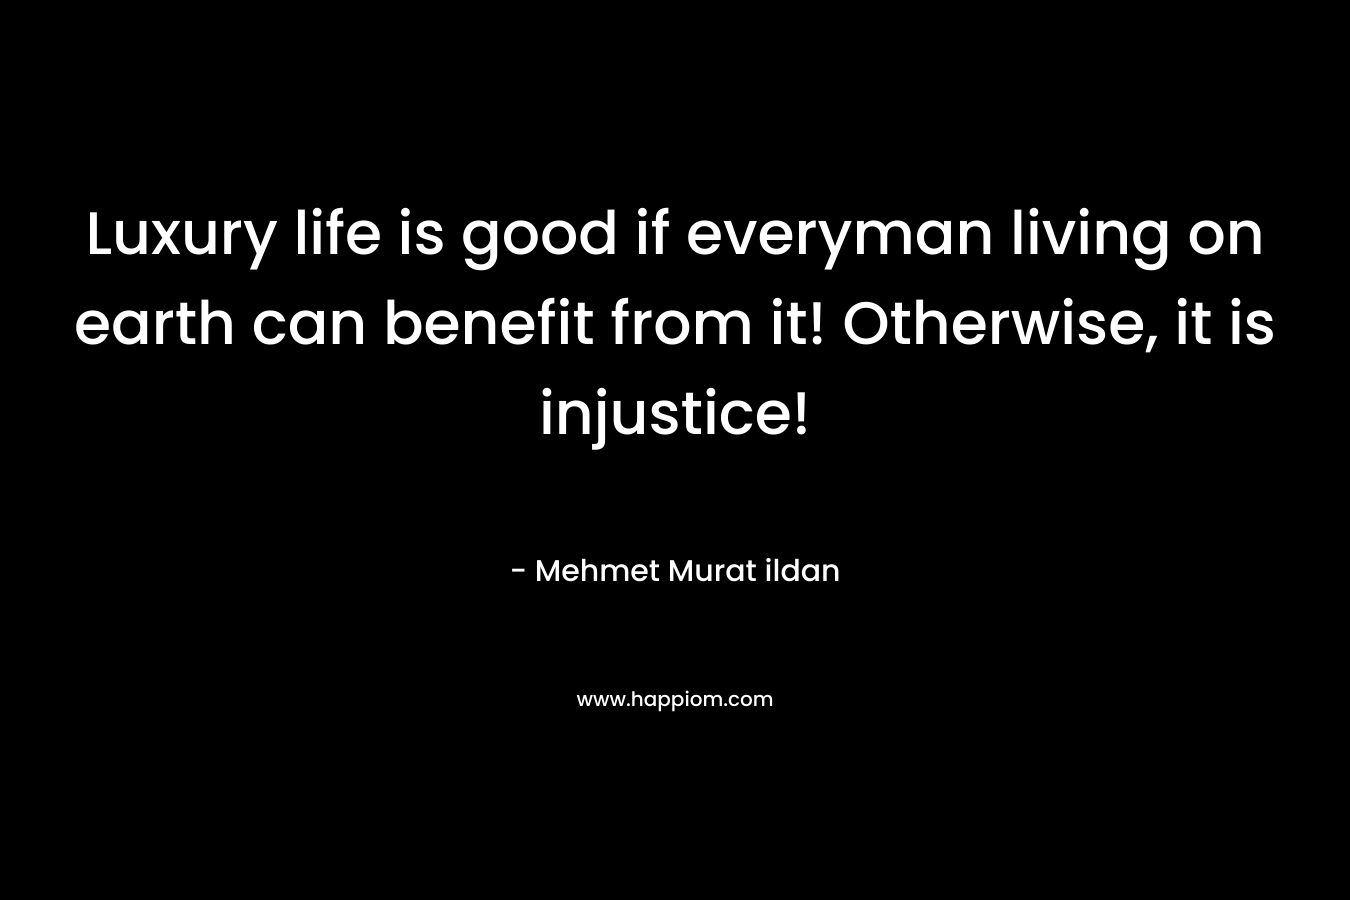 Luxury life is good if everyman living on earth can benefit from it! Otherwise, it is injustice!